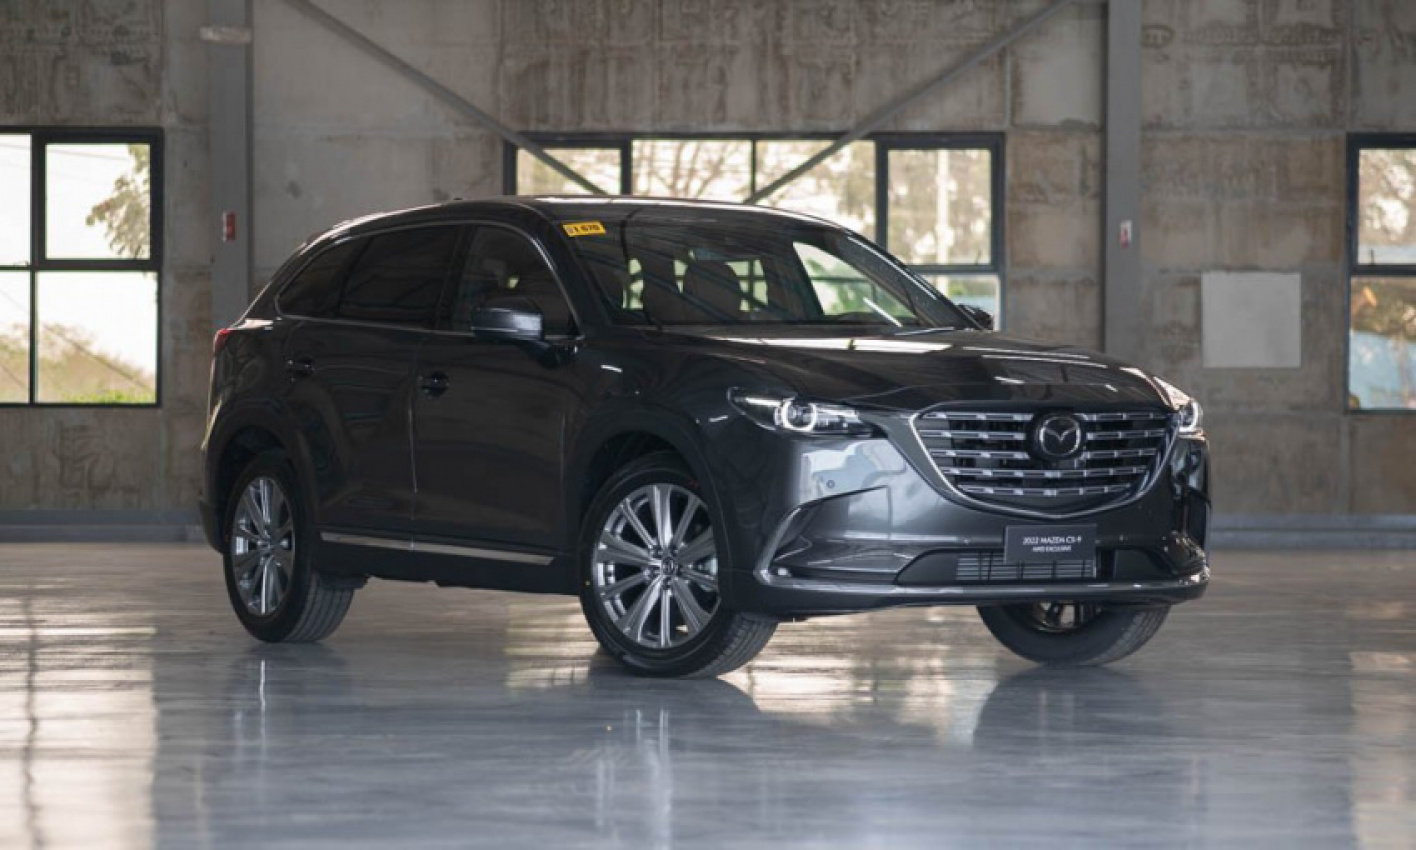 autos, cars, mazda, reviews, mazda cx-9, here’s a peek at the 2022 mazda cx-9 black edition and exclusive